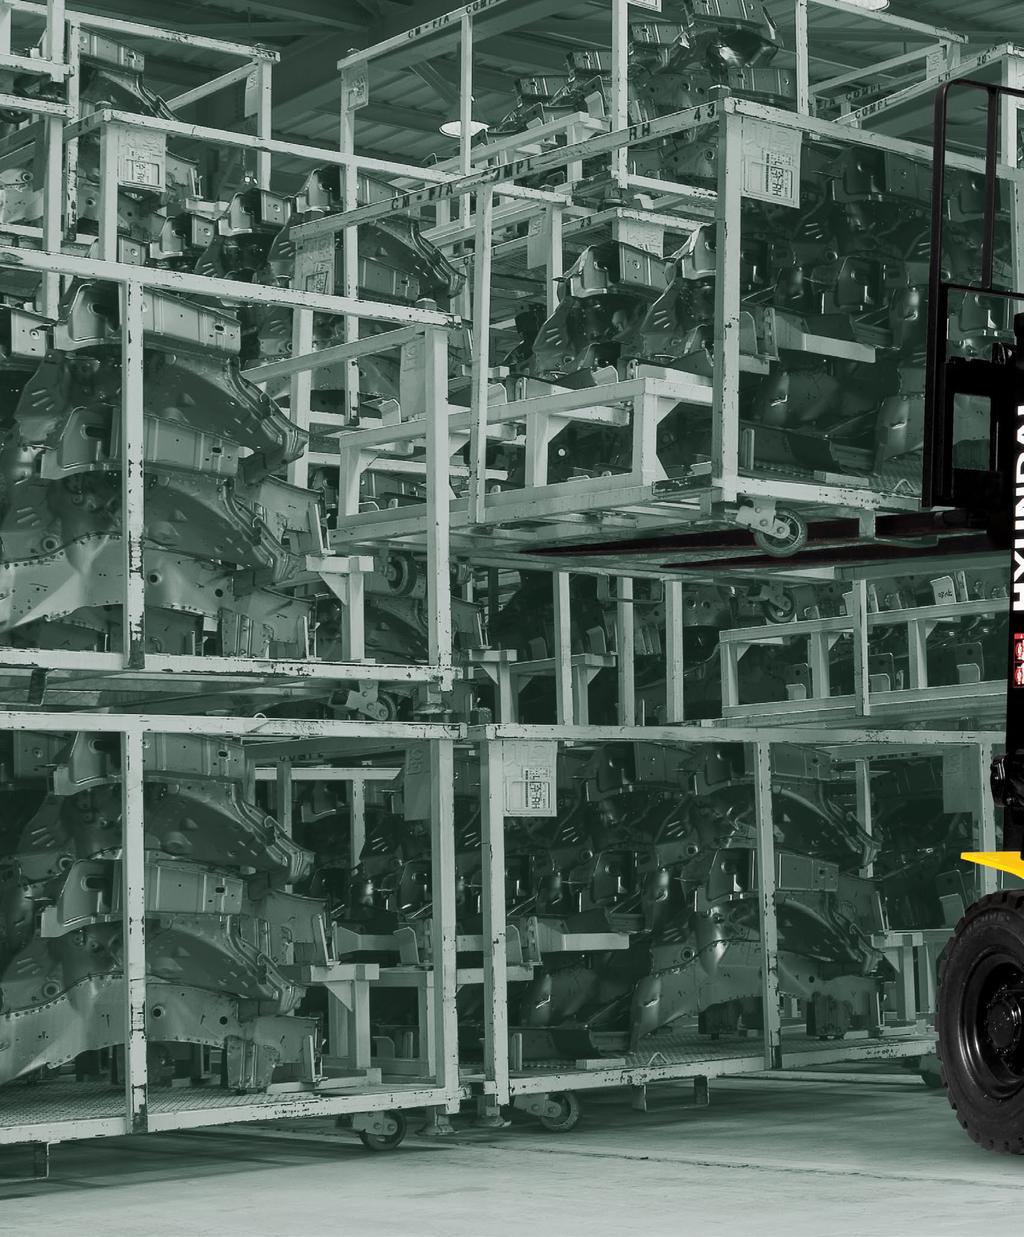 NEW criteria of Forklift Trucks Hyundai introduces a new line of 7A series